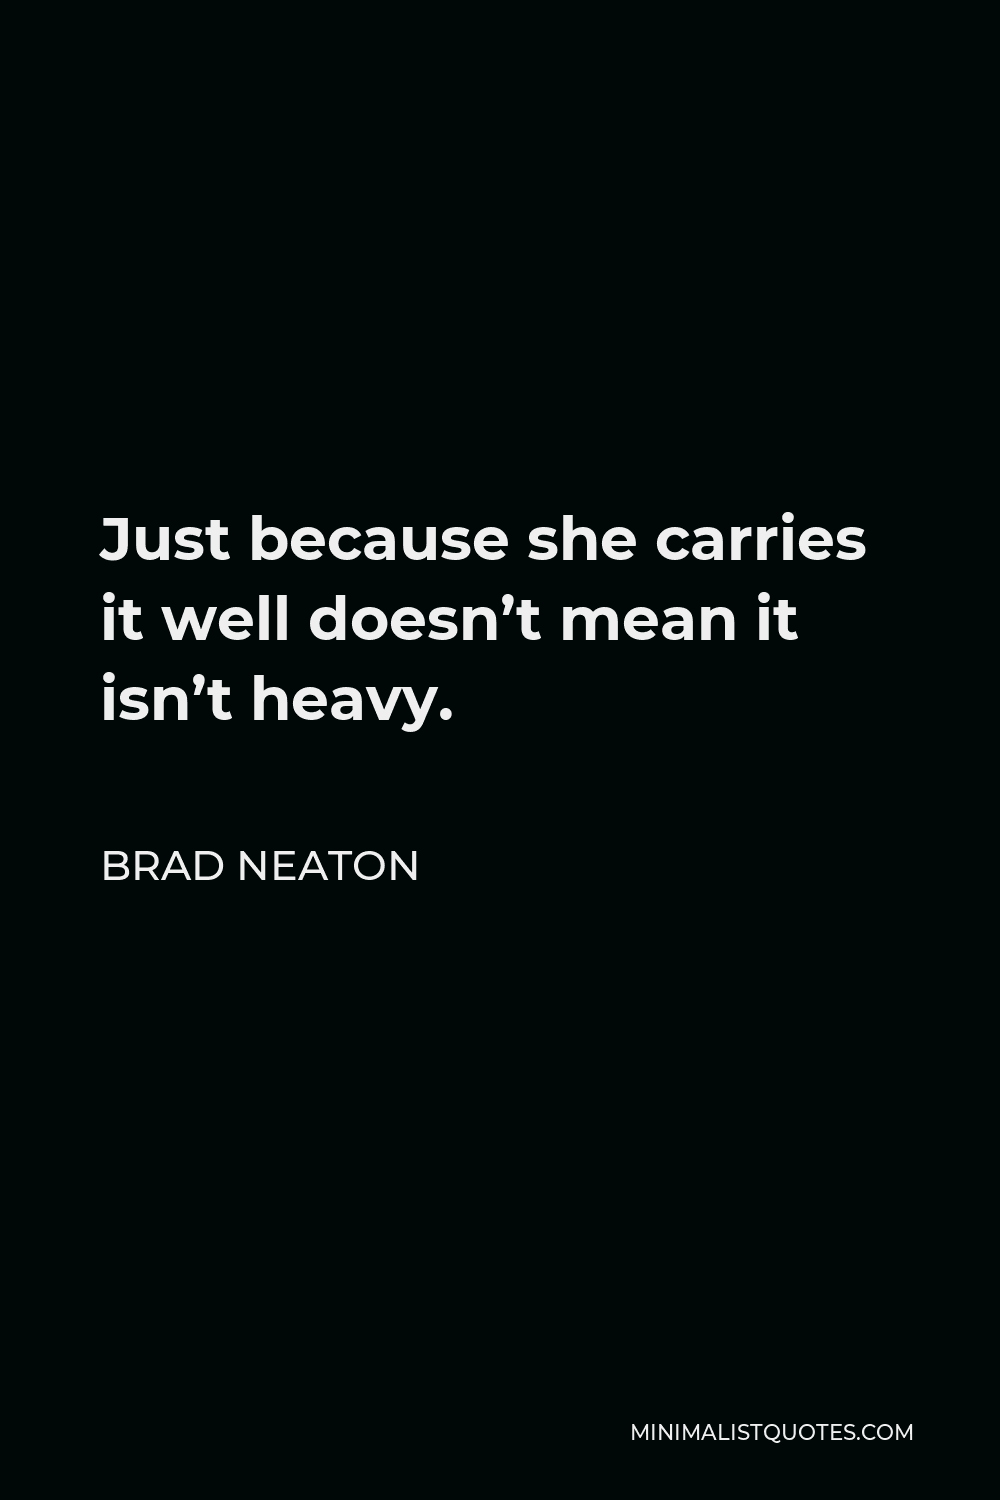 Brad Neaton Quote - Just because she carries it well doesn’t mean it isn’t heavy.